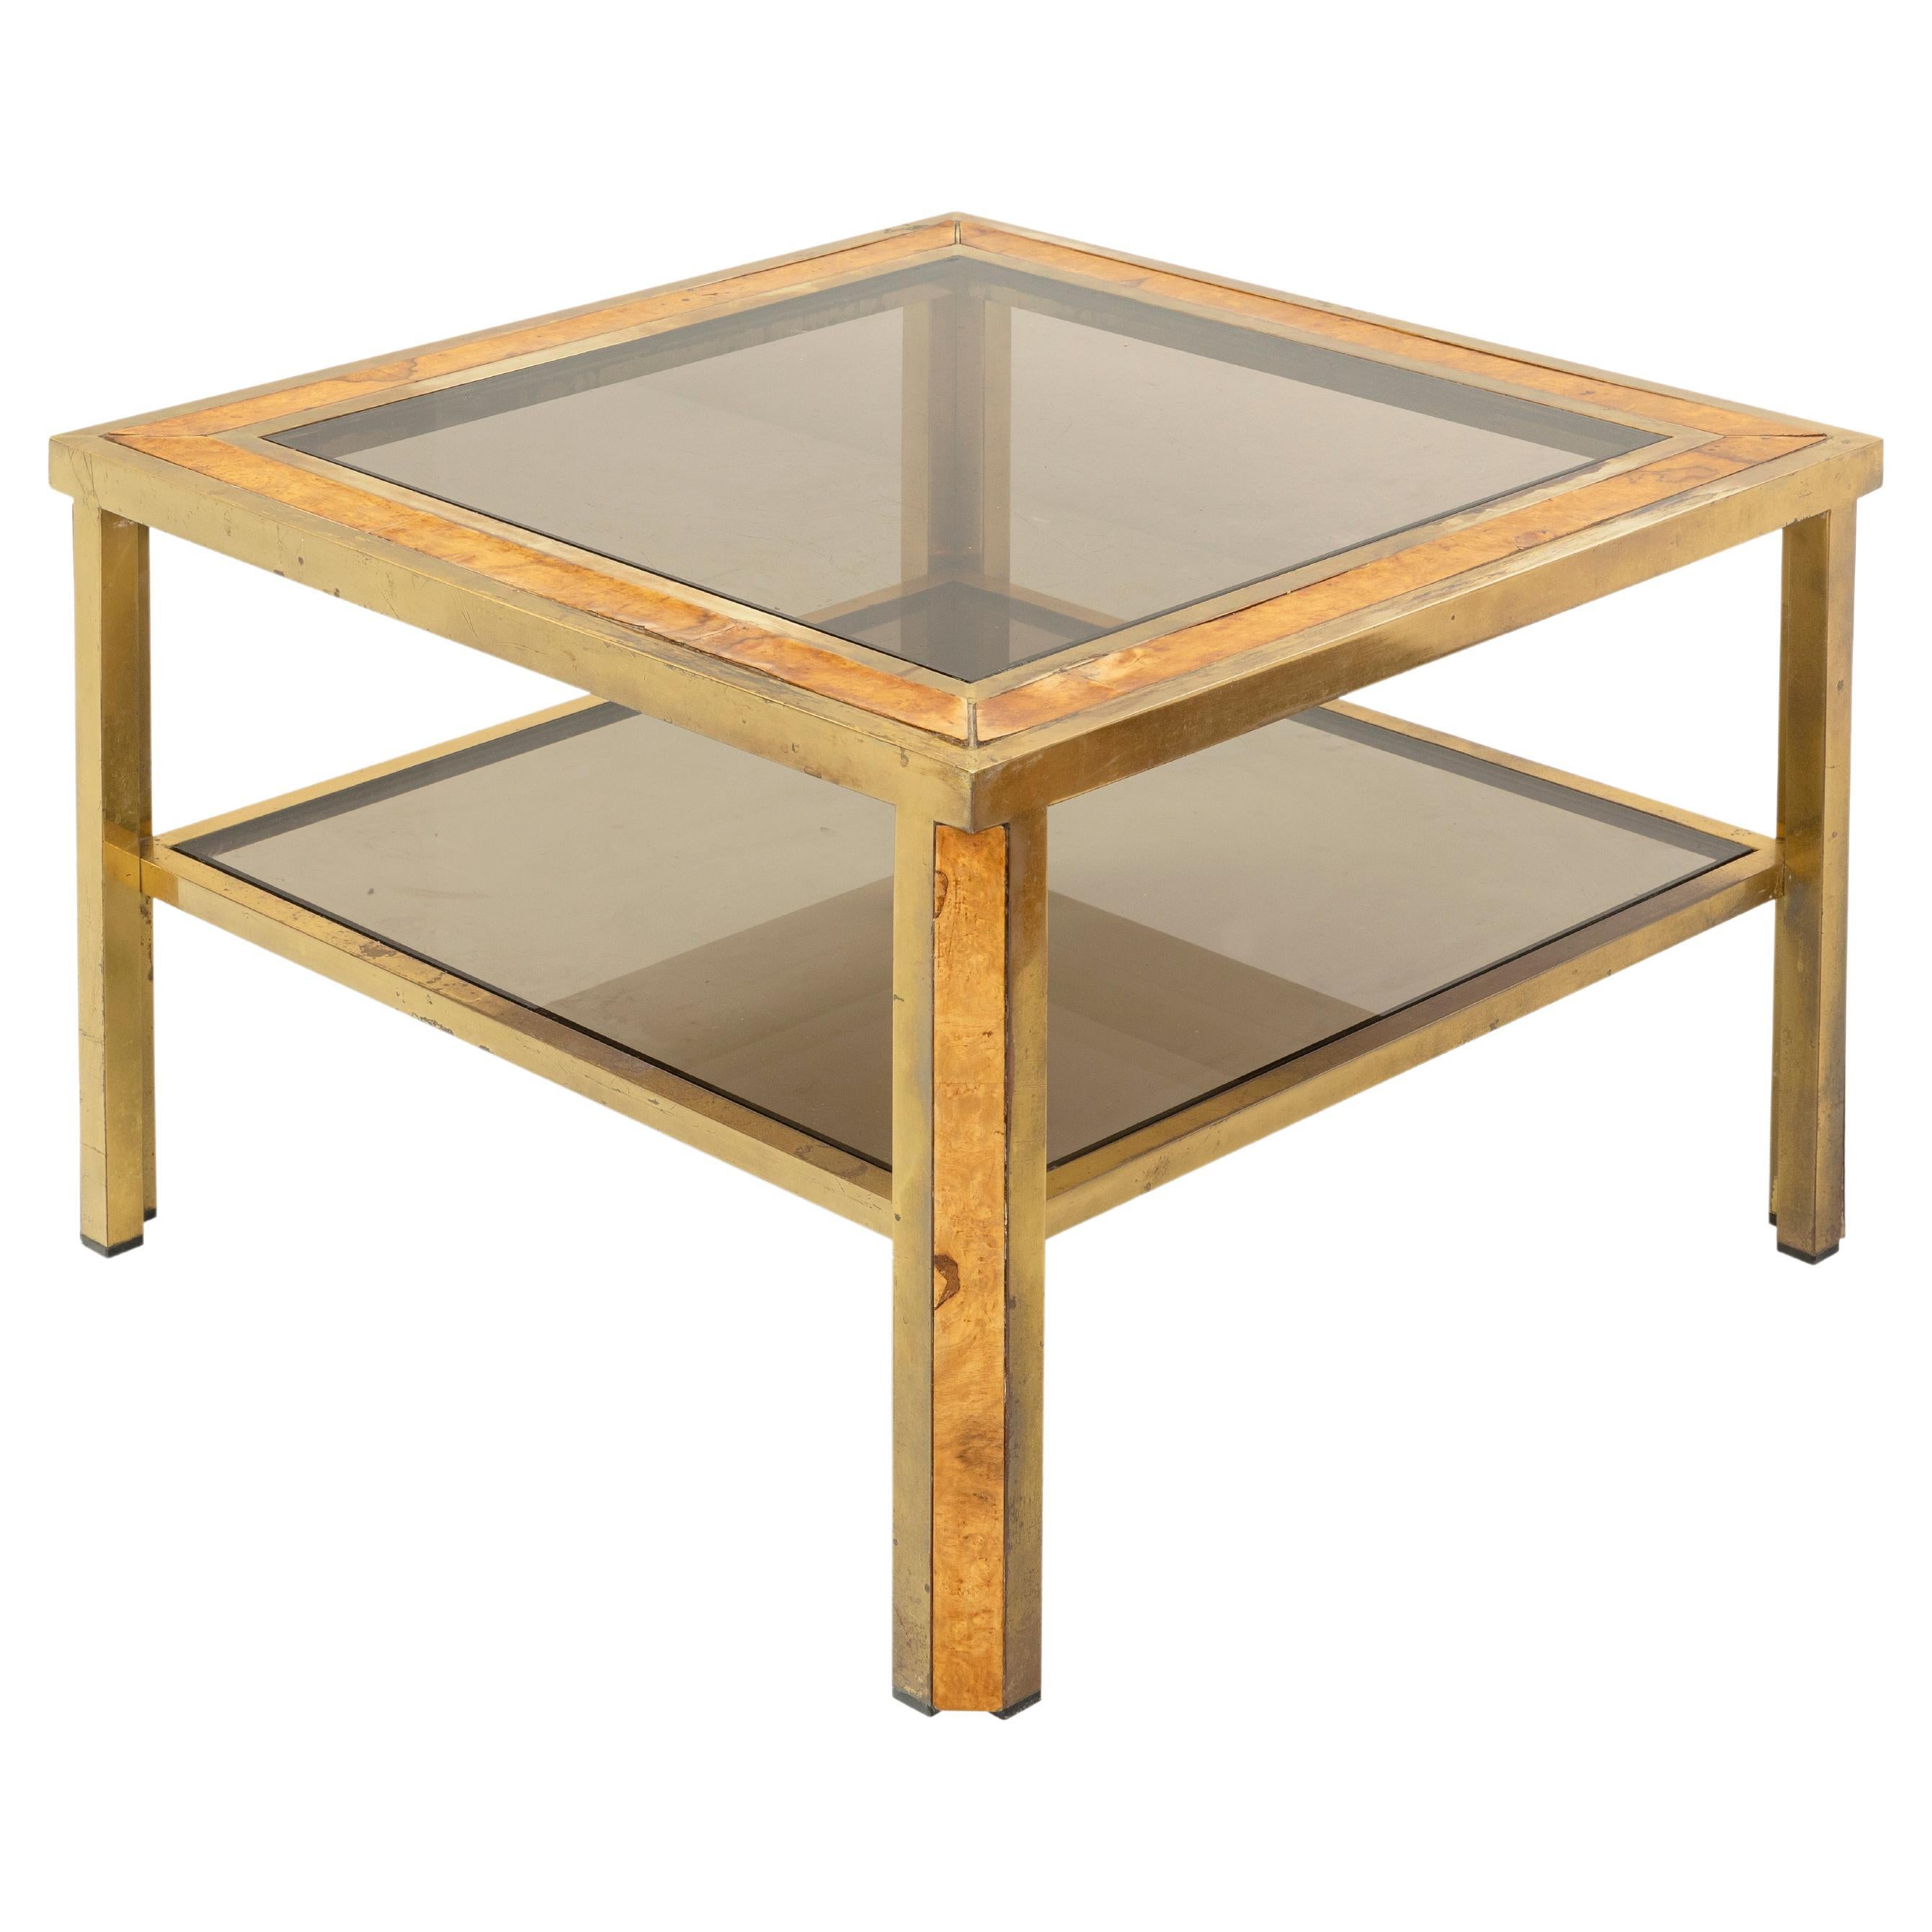 Coffee table with two brass shelves and briarwood details, smoked glass tops. 